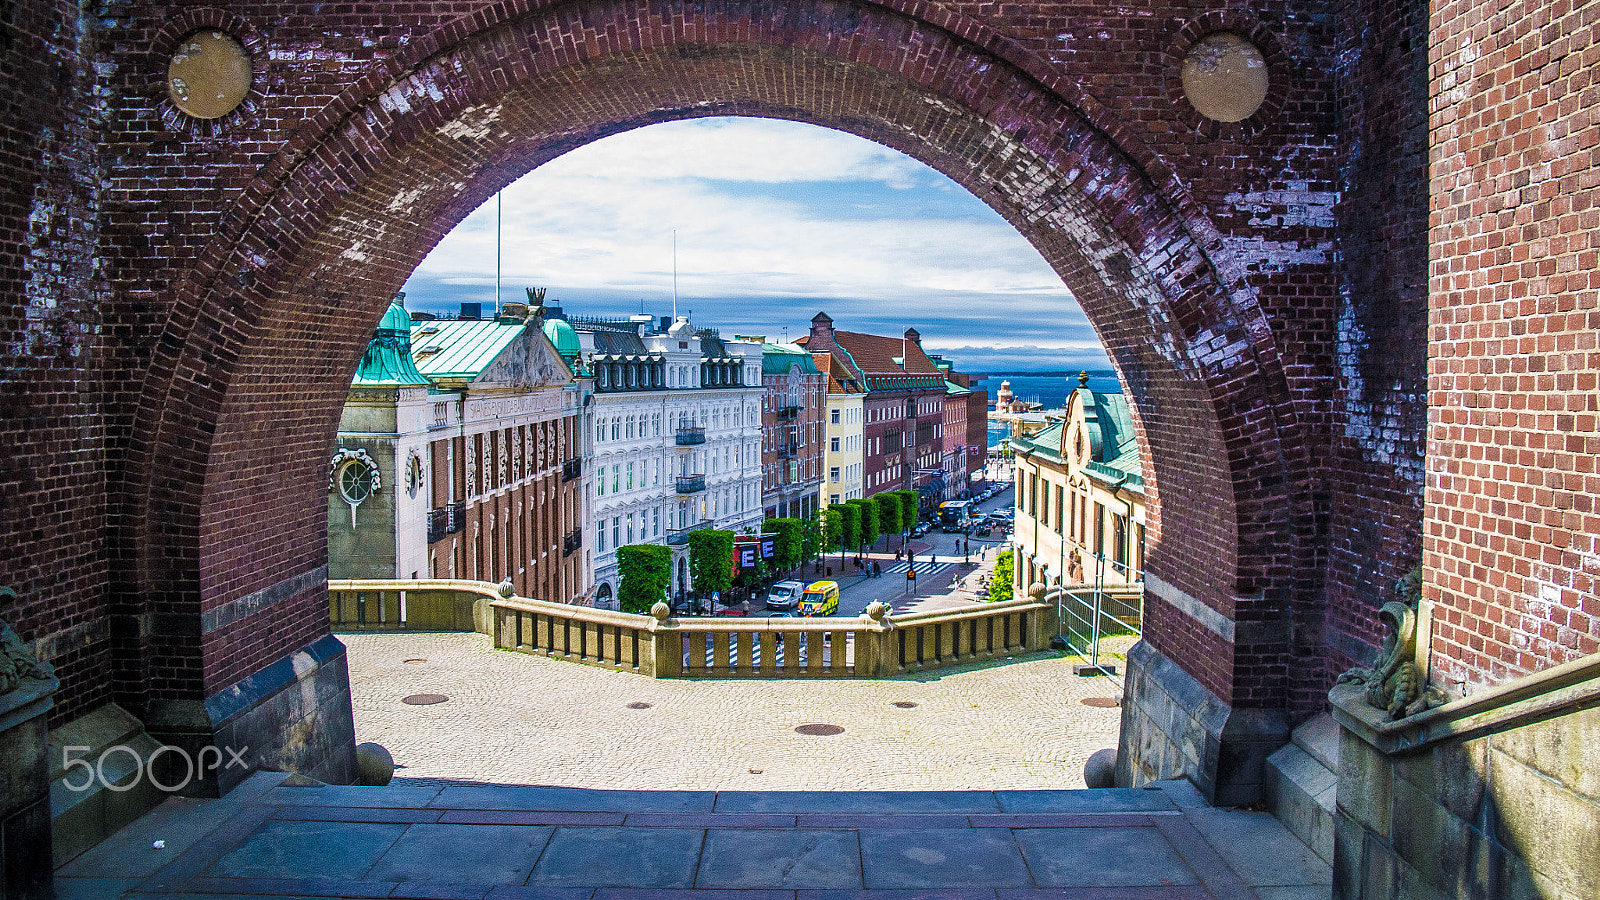 Samsung NX5 sample photo. City through the gate of a castle photography